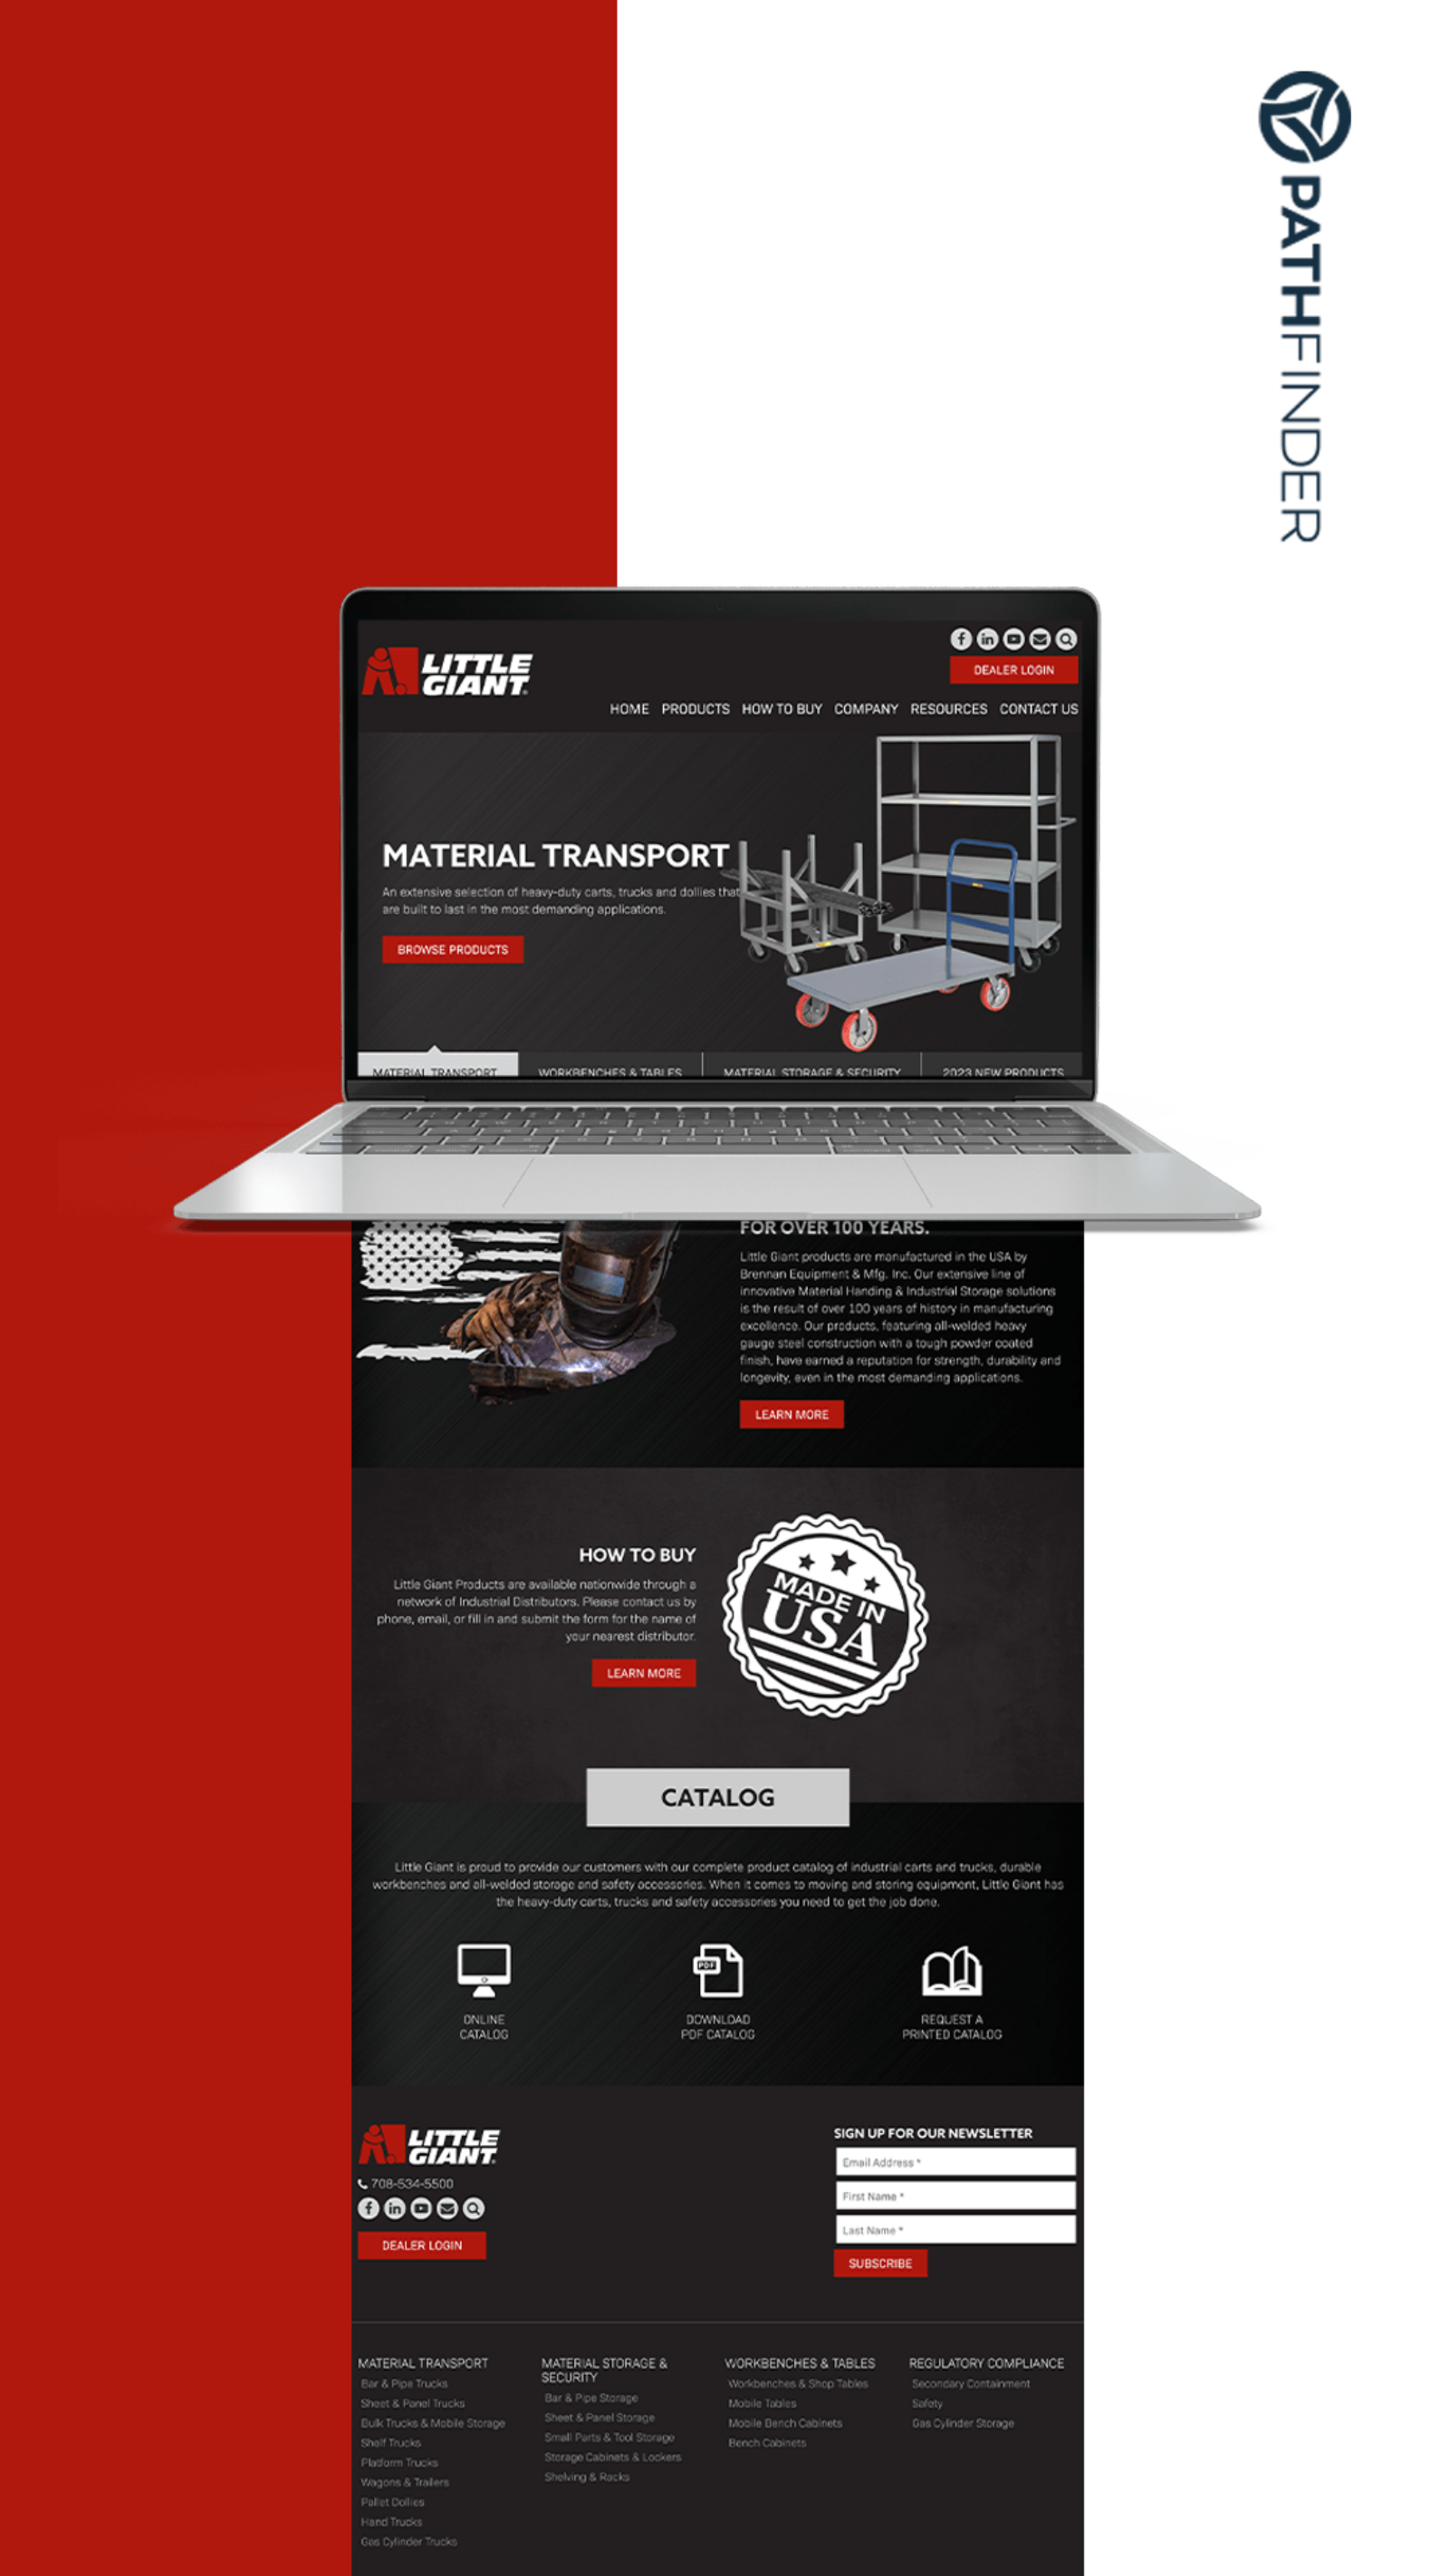 Little Giant Manufacturing Website